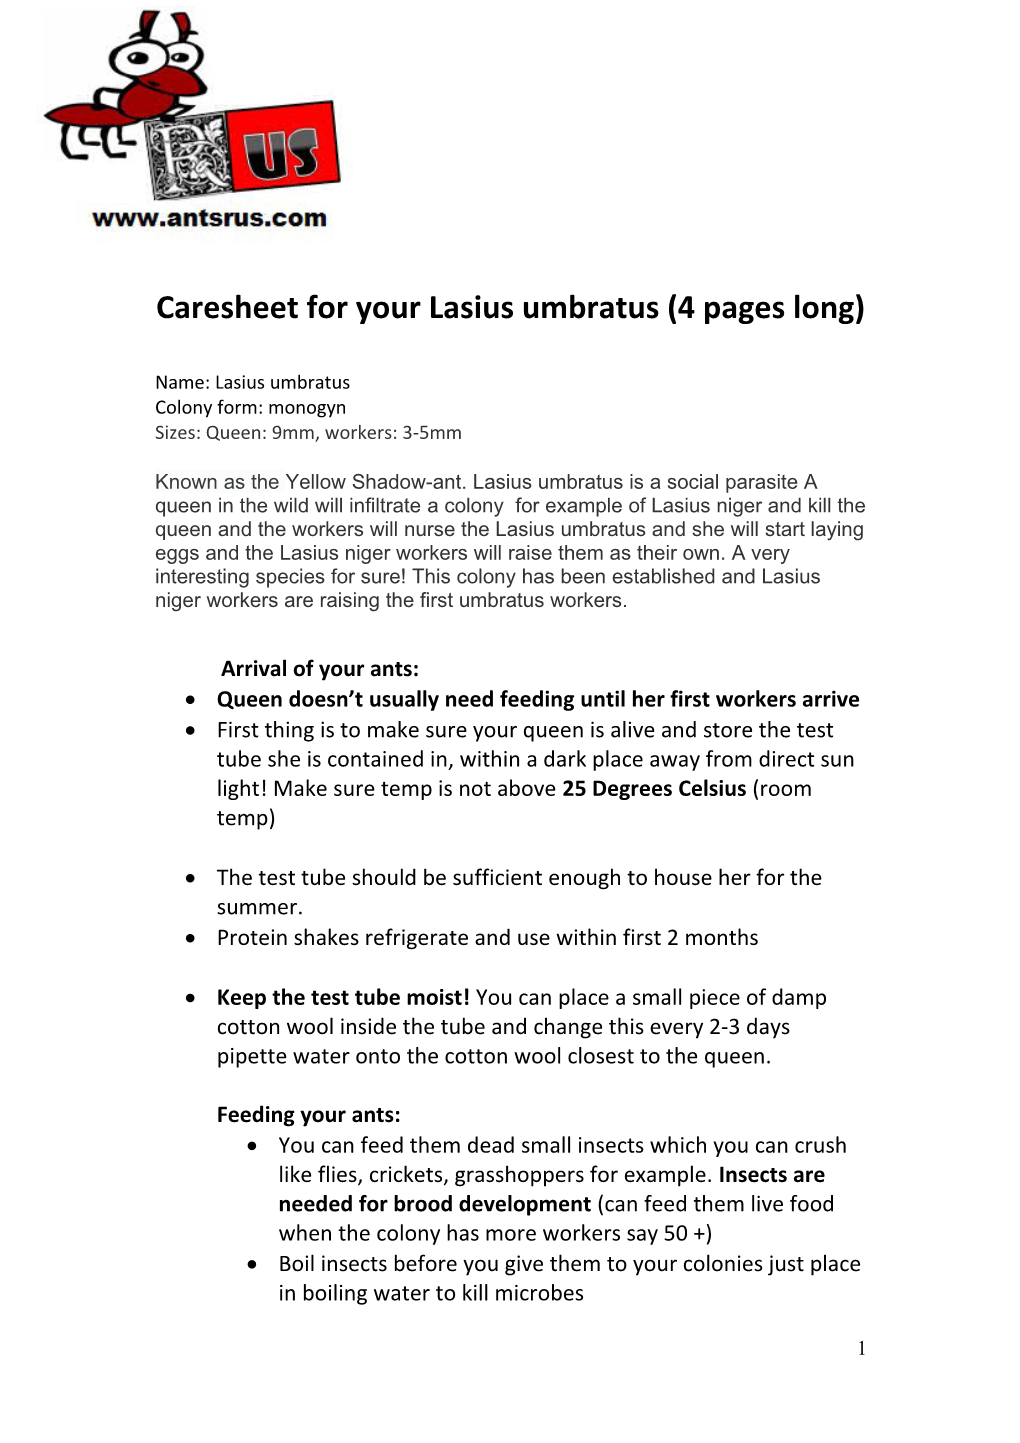 Caresheet for Your Lasius Umbratus (4 Pages Long)